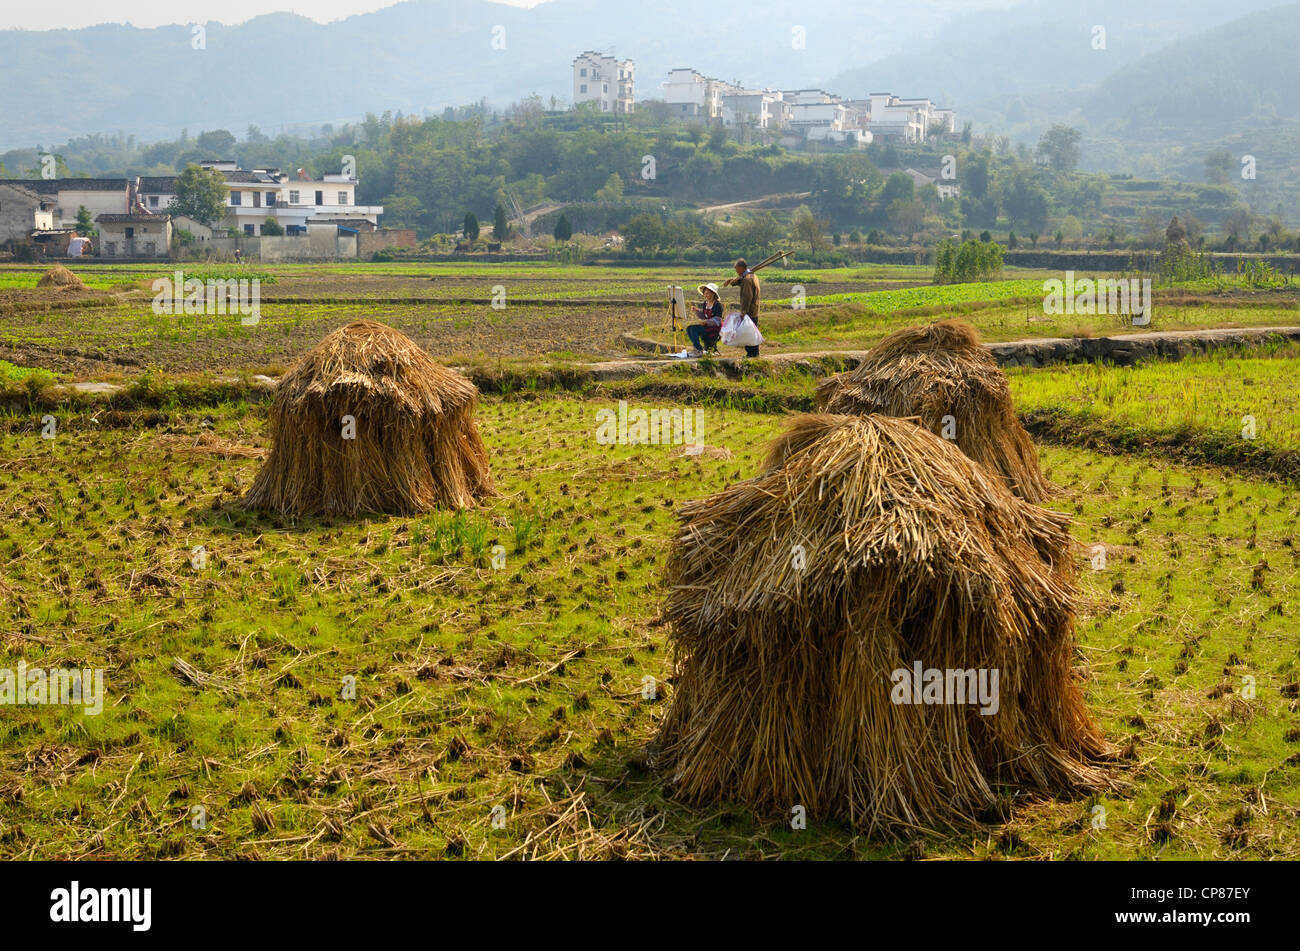 Farmer admiring painting by young Chinese female art student in fields with haystacks Yanggancun hilltop village Huangshan Peoples Republic of China Stock Photo